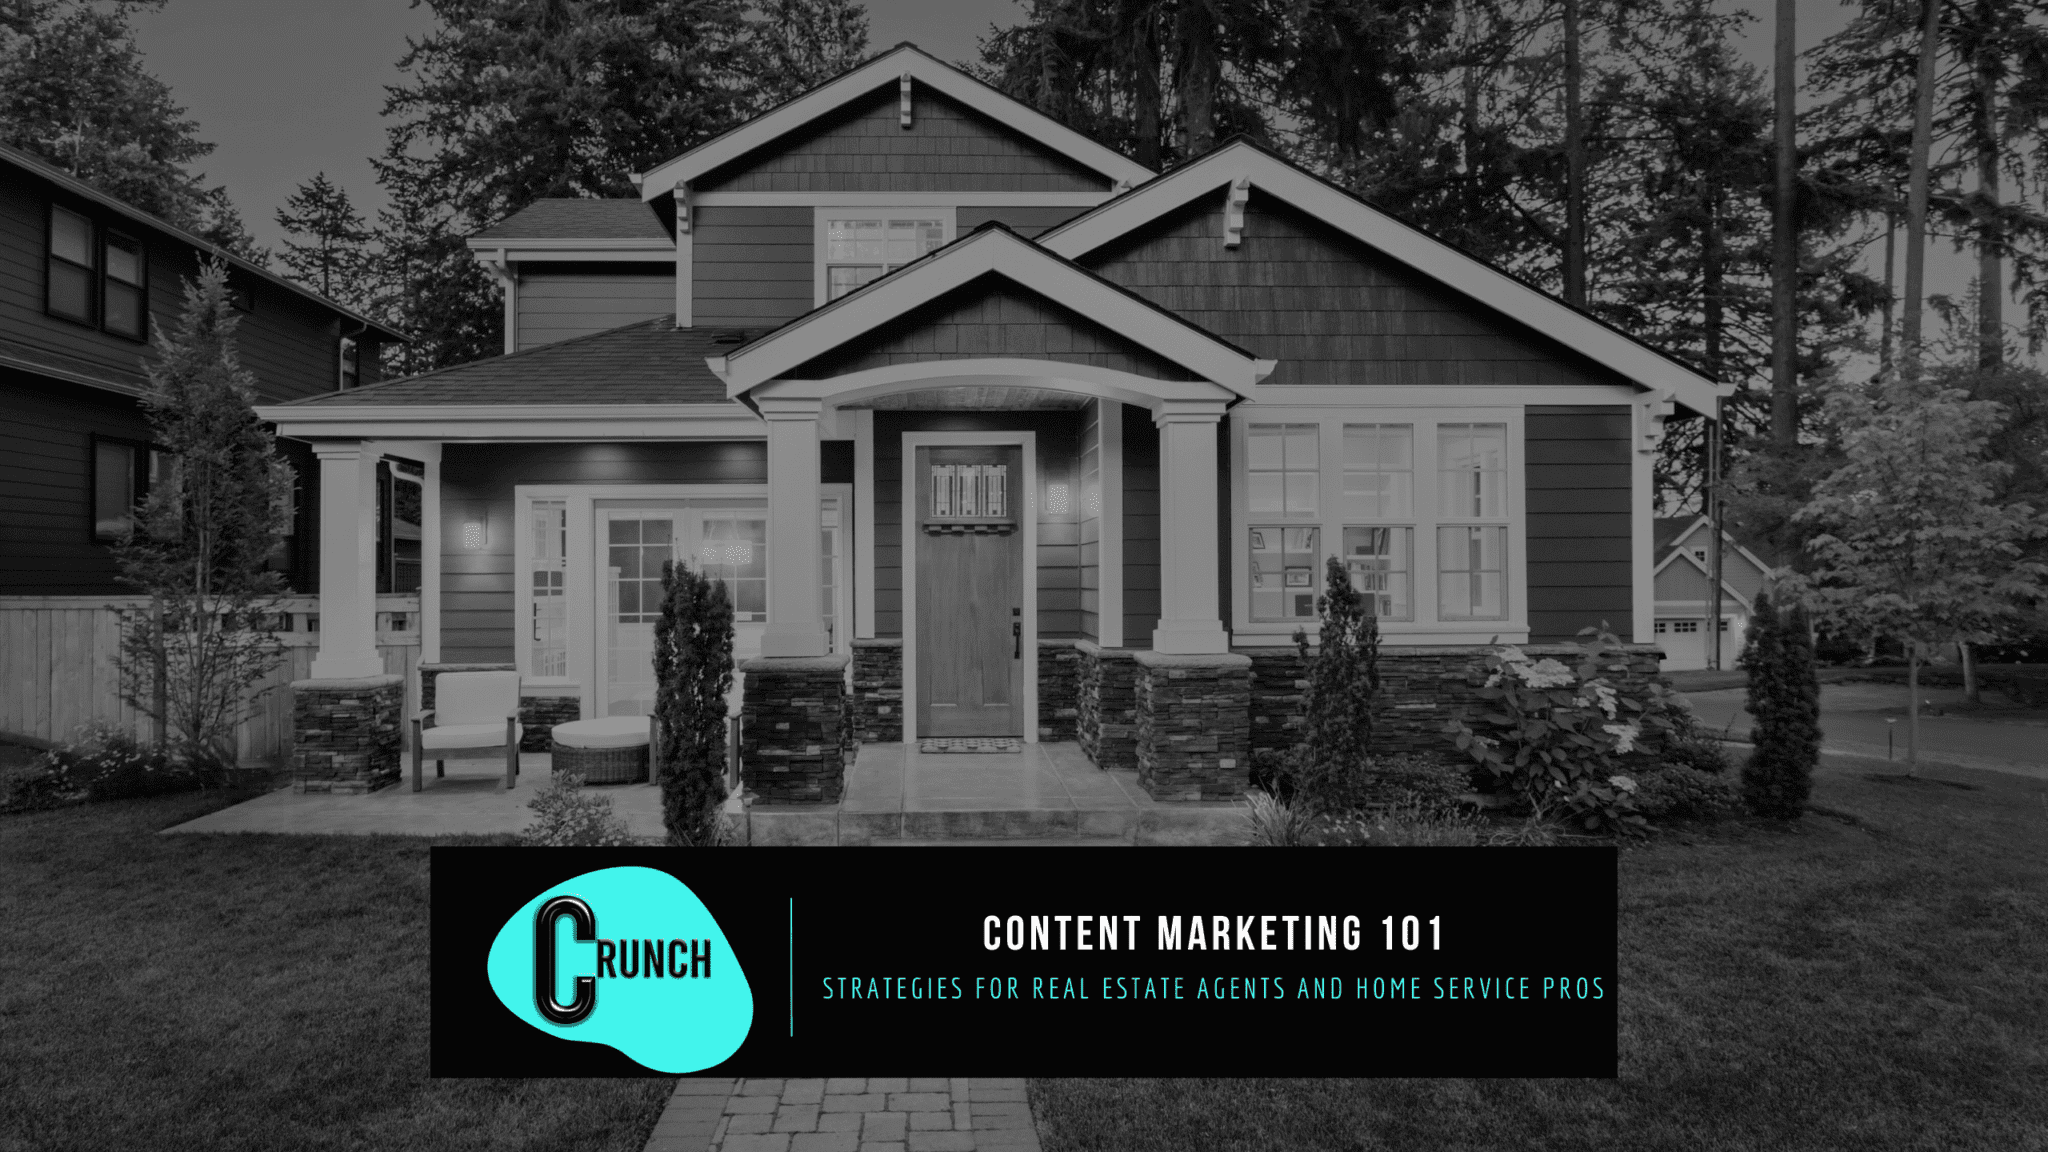 Content Marketing Strategies for Real Estate Agents and Home Service Pros